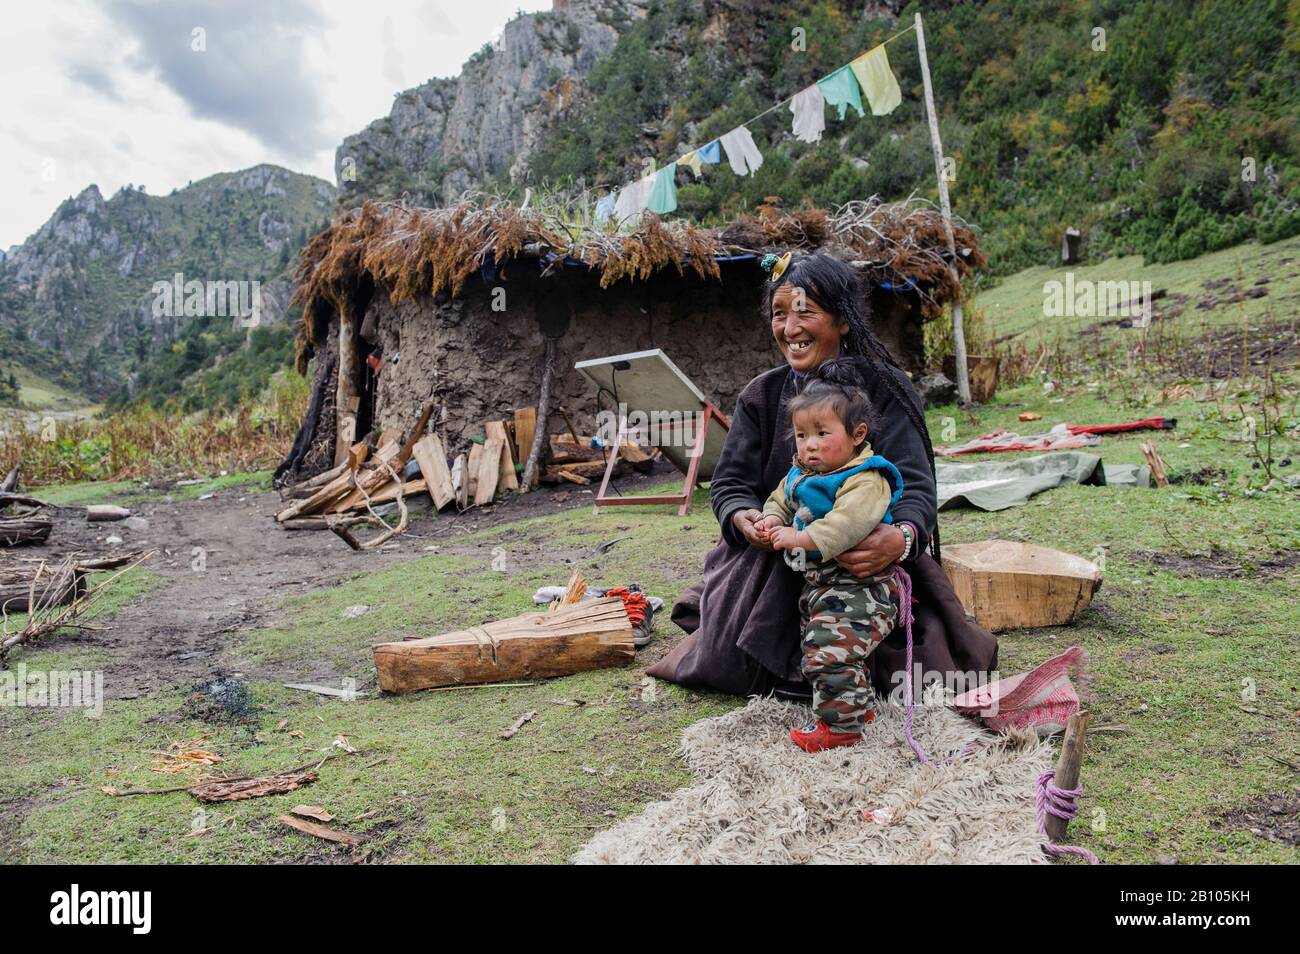 Tibetan families stick together. While parents work, grandparents are in charge of looking after their grandchildren. Remote Tibetan plateau Stock Photo